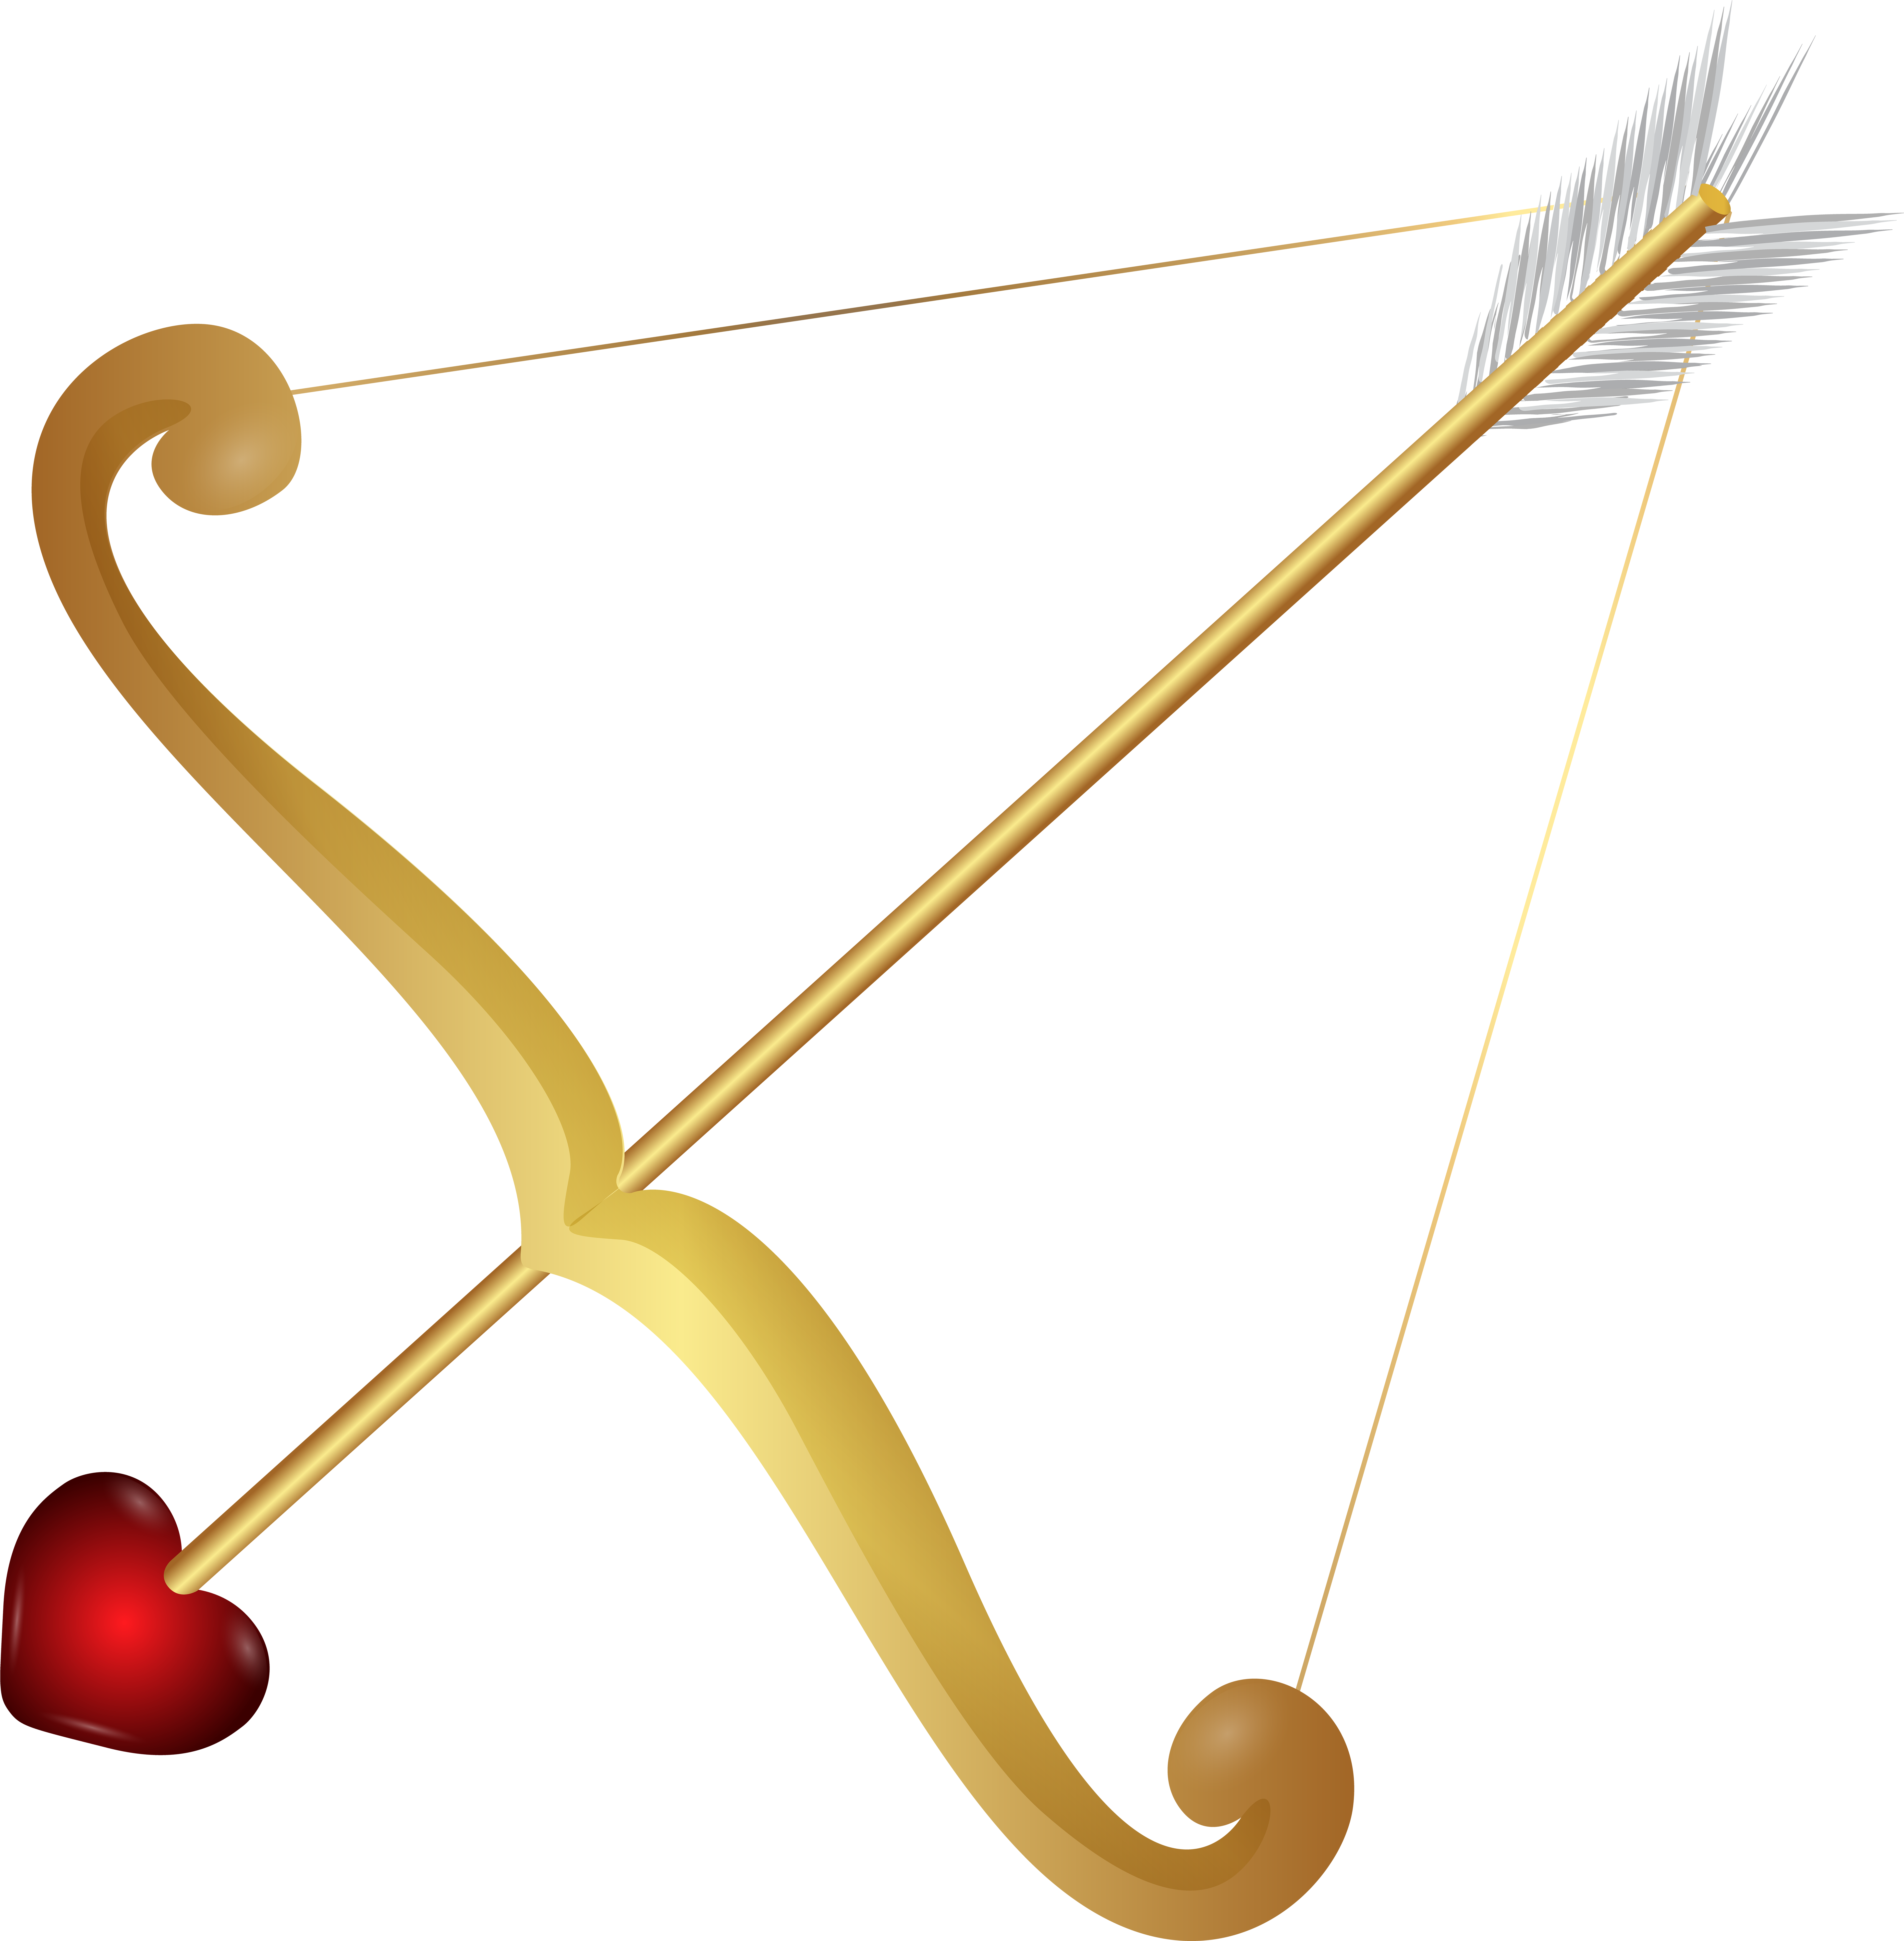 Cupid Arrow PNG Image Background